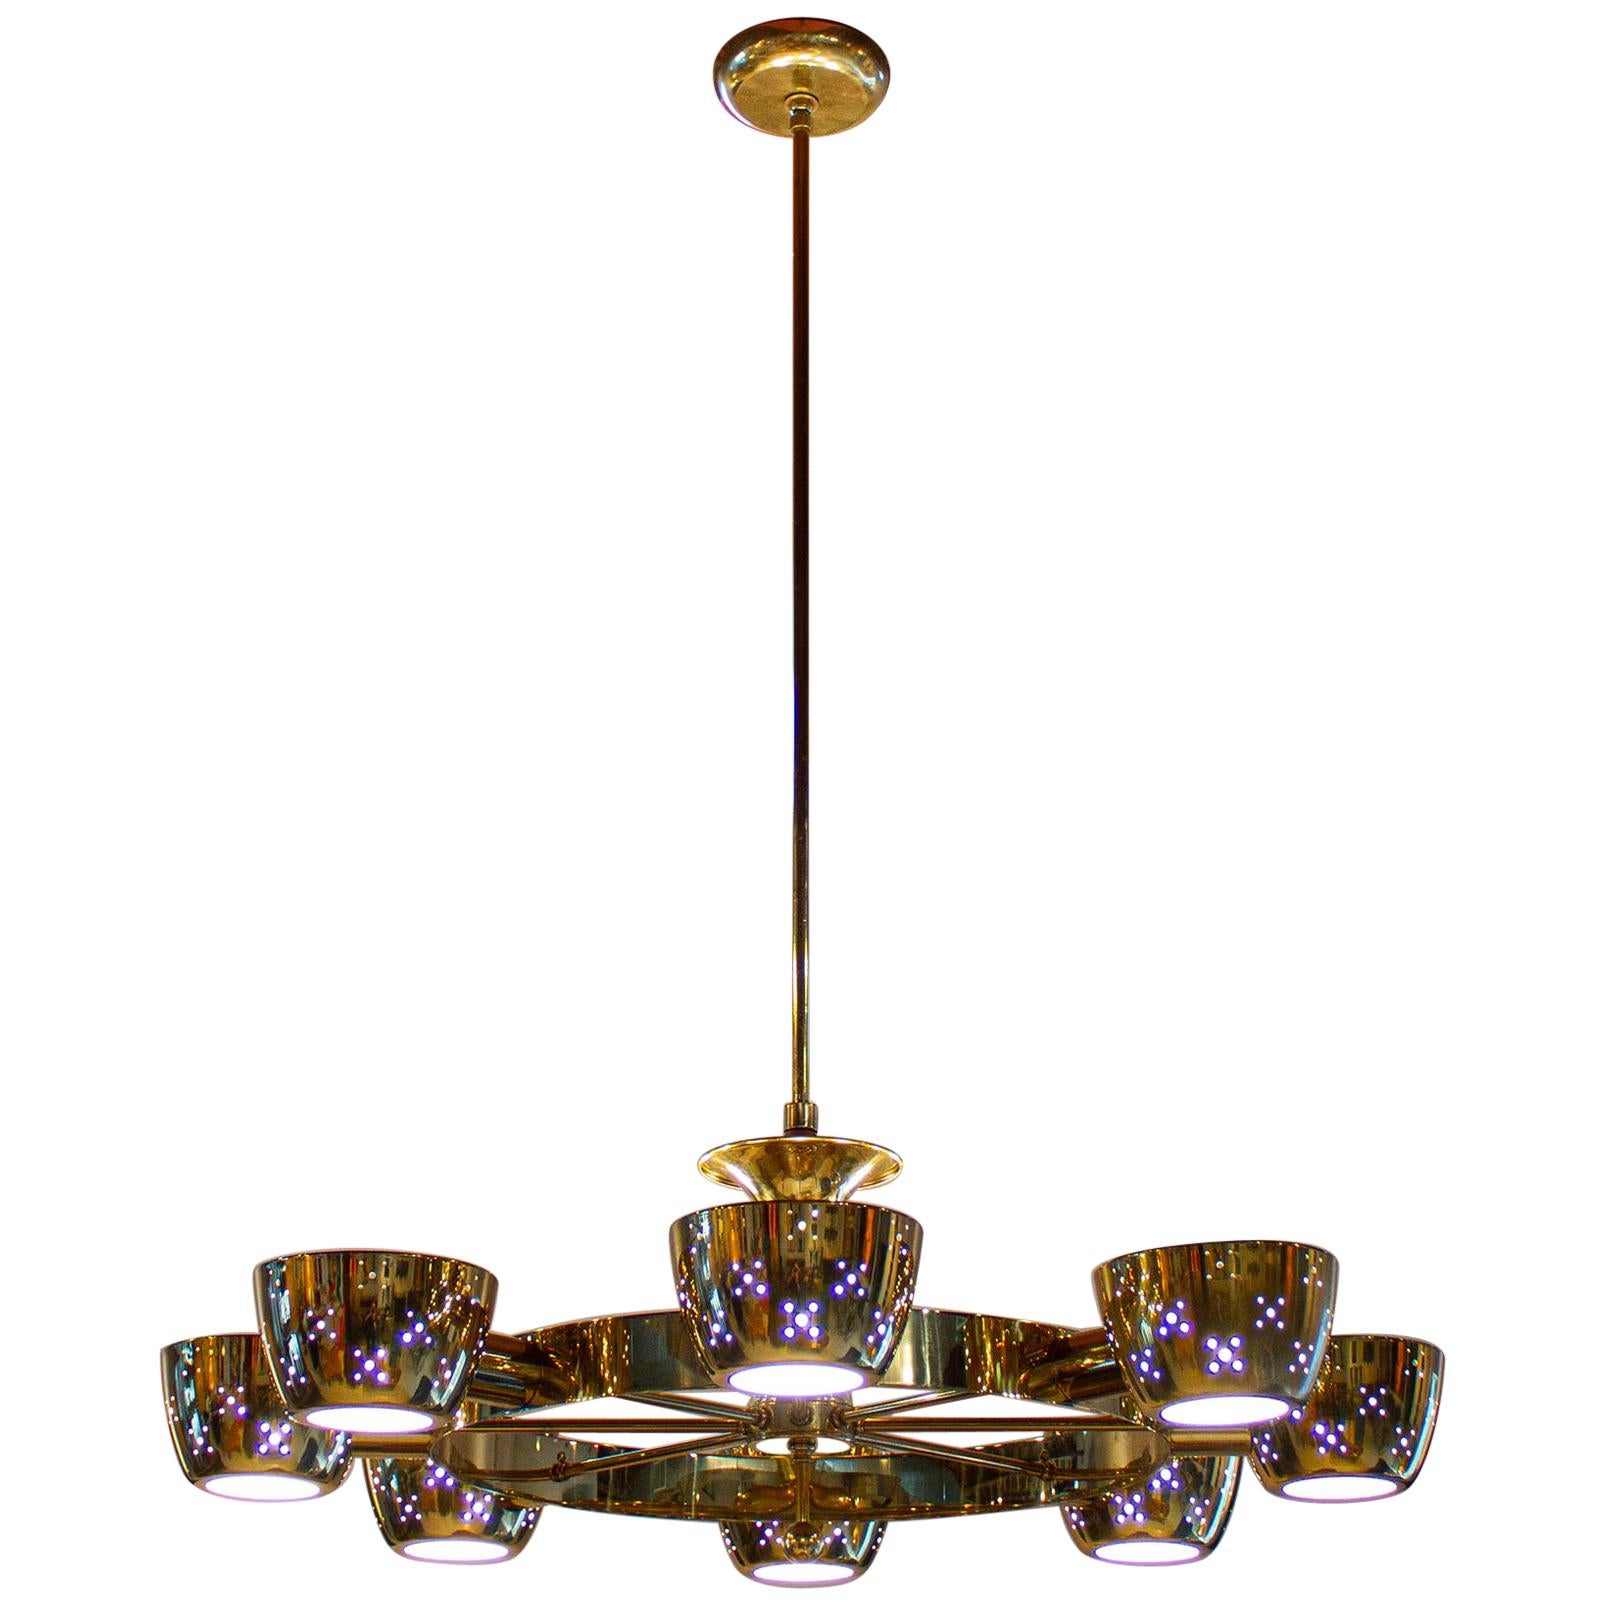 Lightolier Chandelier after Gino Sarfatti in Perforated Brass and Frosted Glass